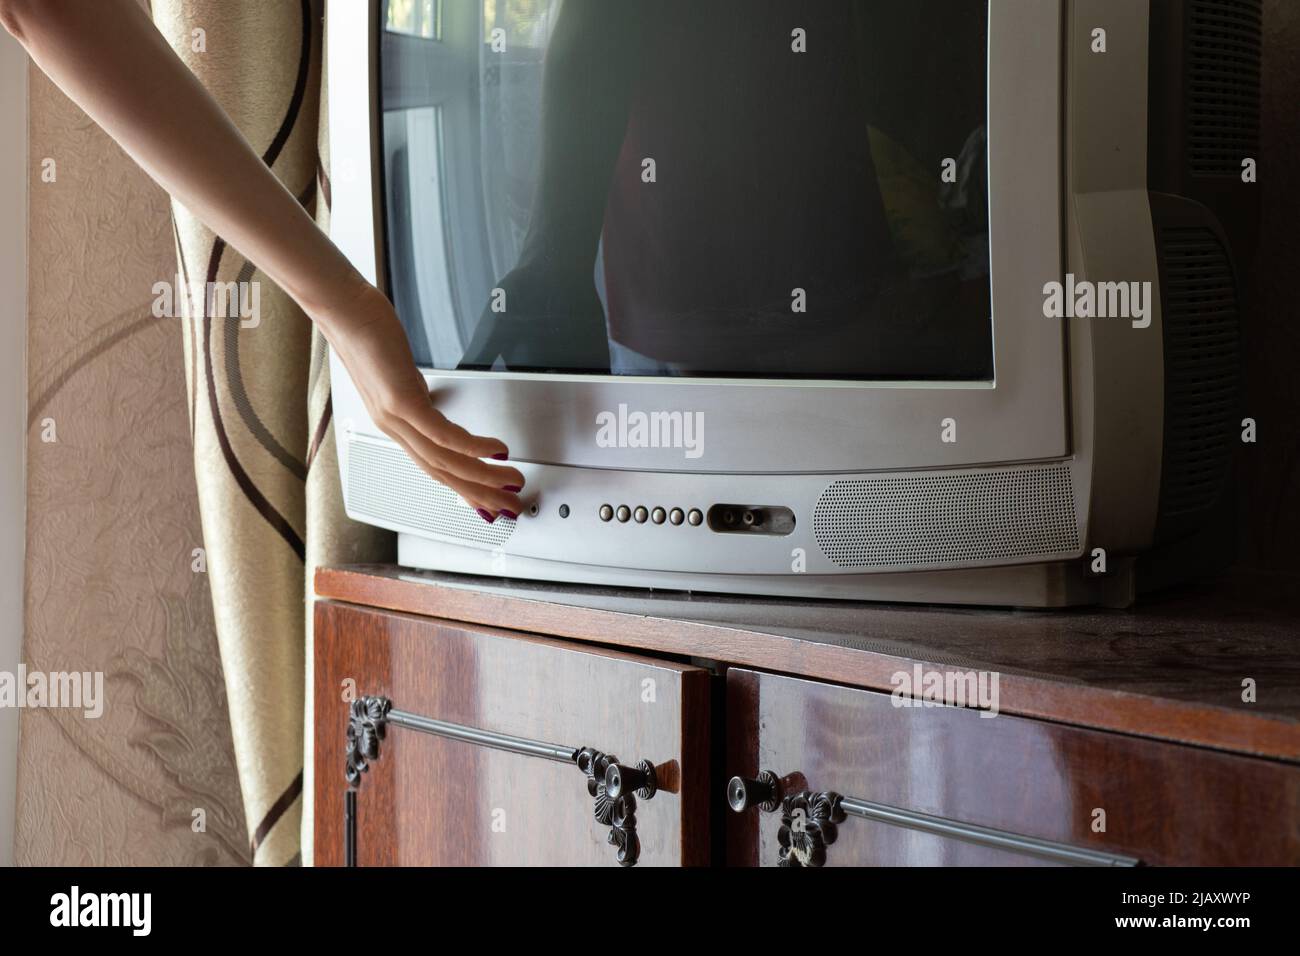 A woman's hand turns on an old gray TV in an apartment at home Stock Photo